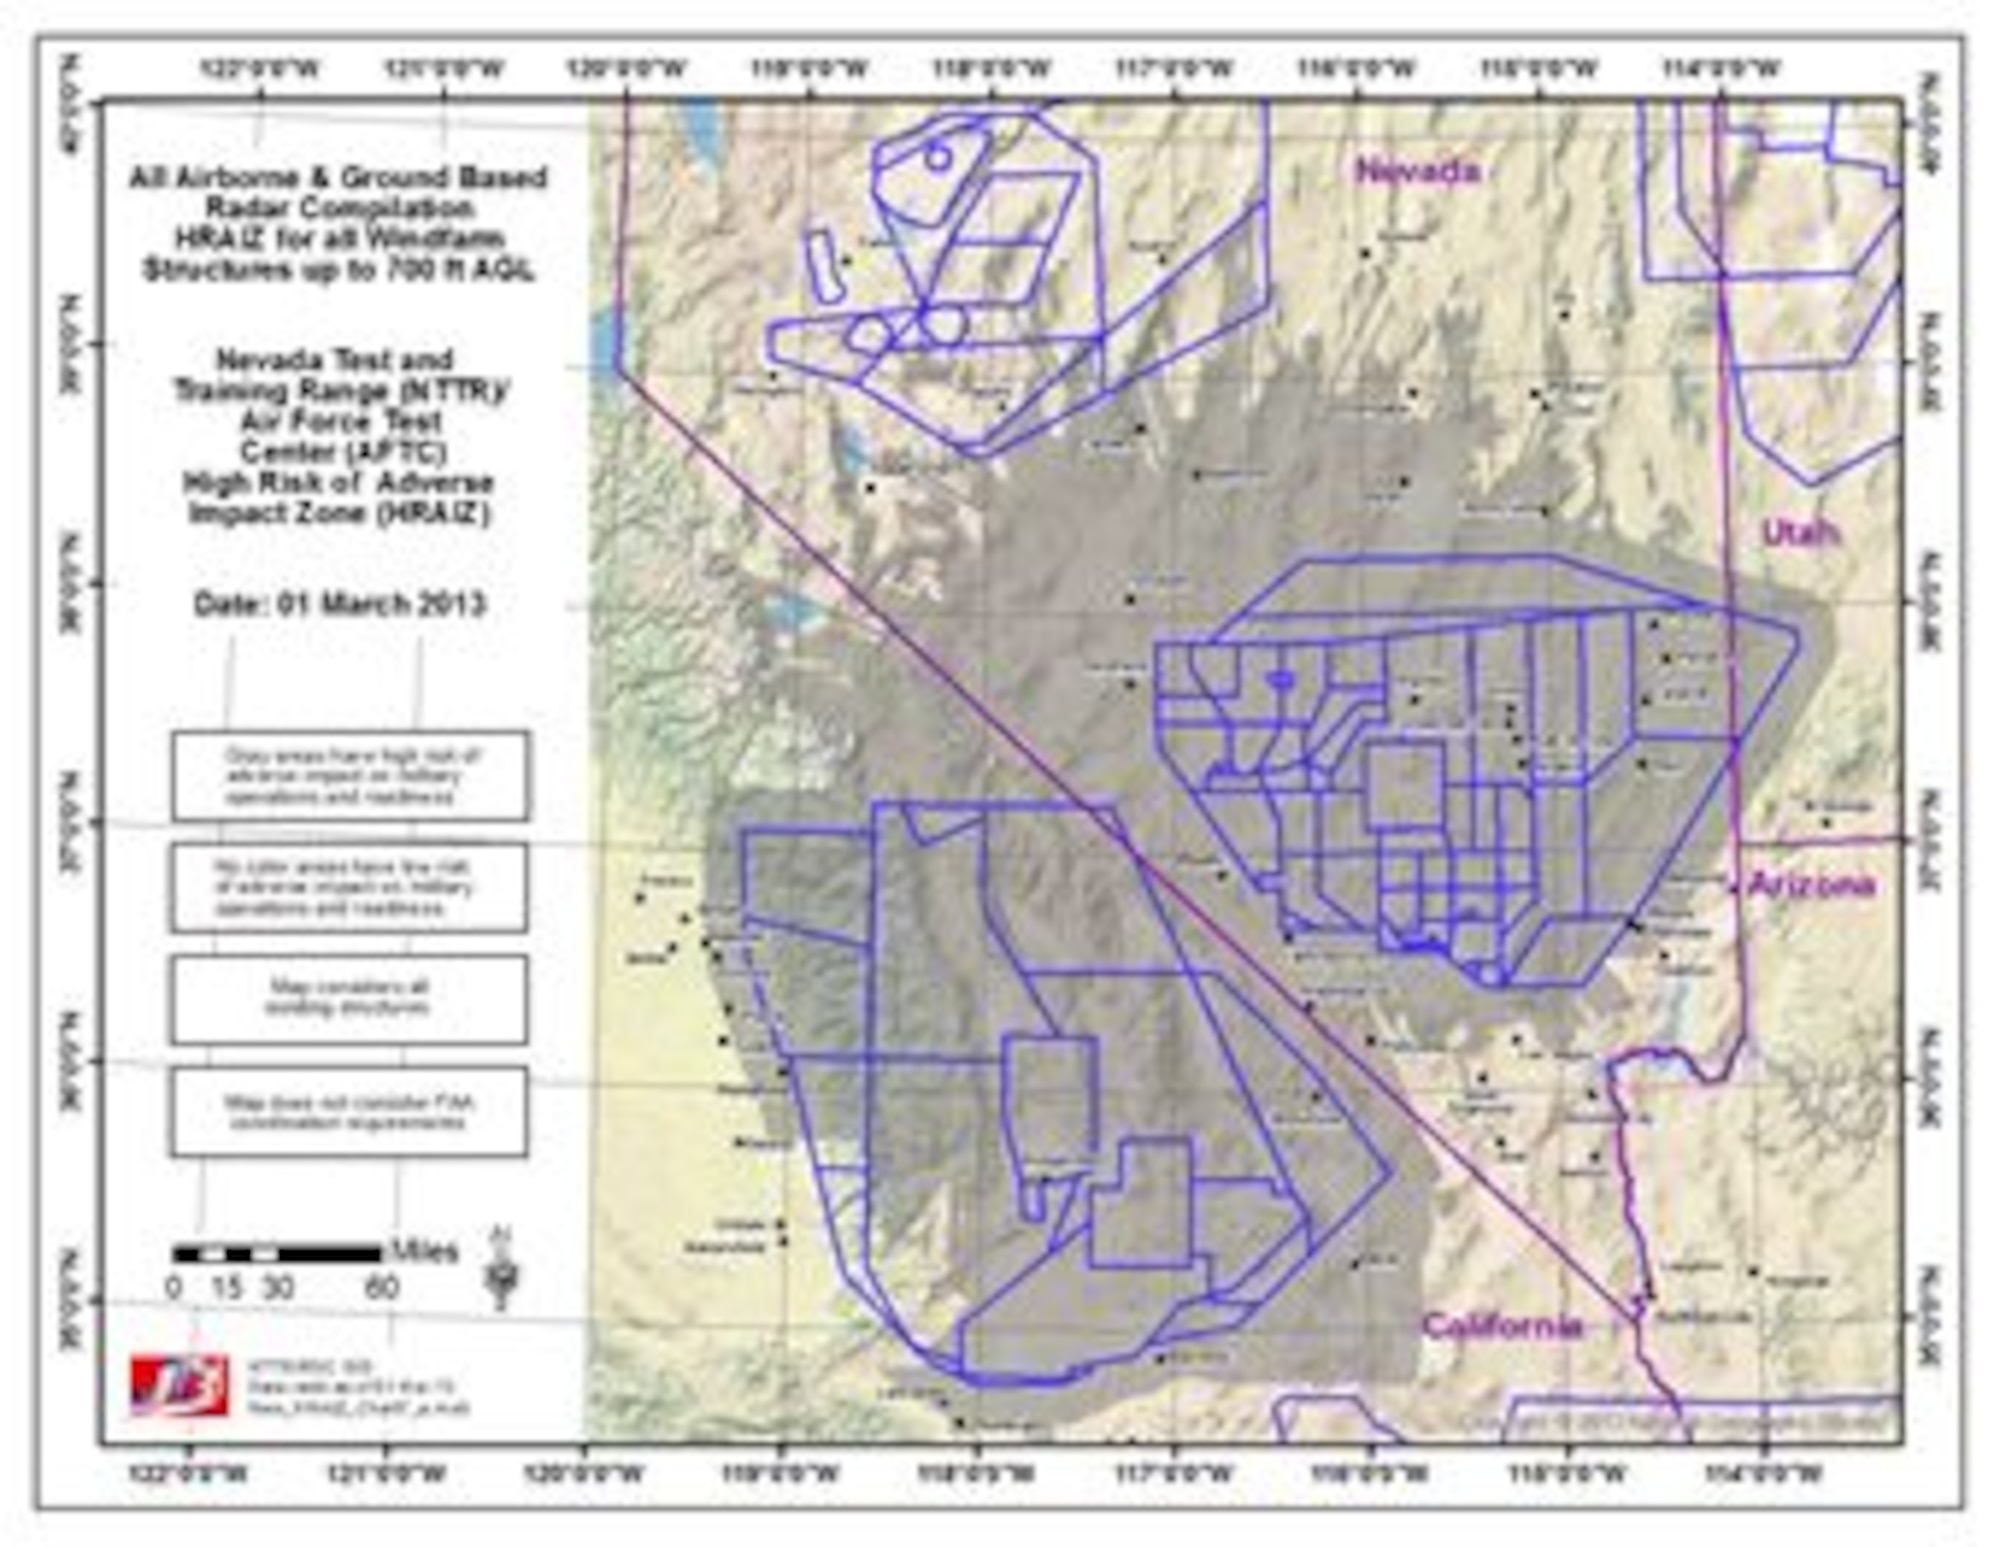 The High Risk of Adverse Impact Zone (HRAIZ) map depicts the Air Force area of interest for R-2508 and Nellis Test and Training Range (NTTR) operational areas. (U.S. Air Force courtesy graphic)



